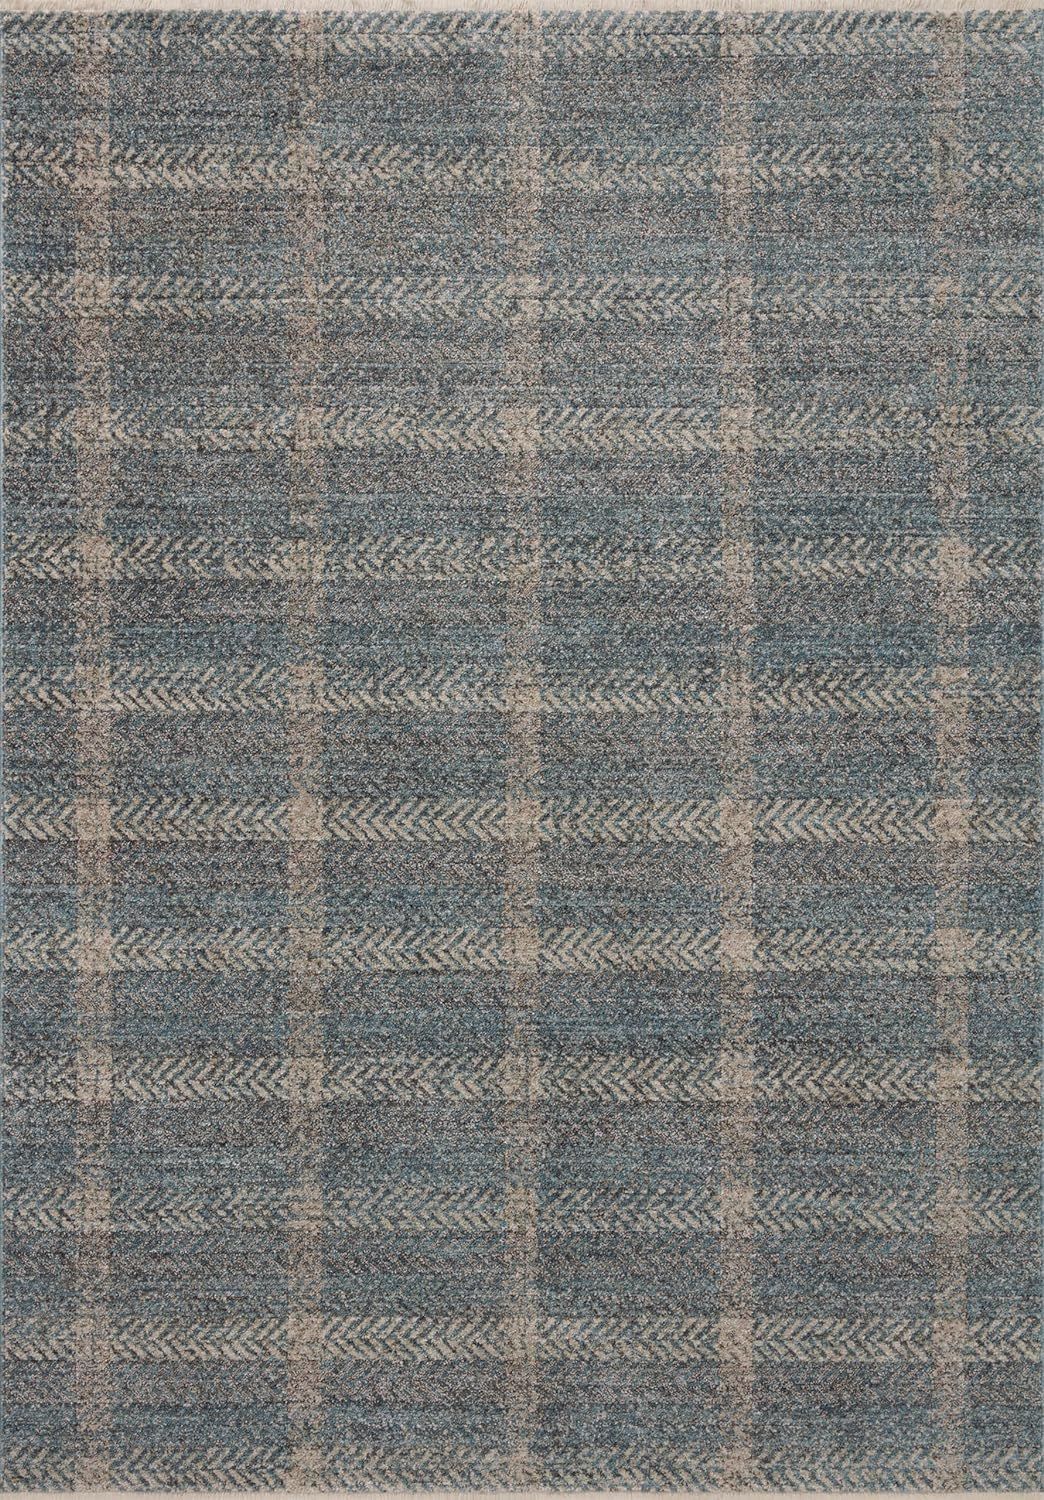 Loloi Angela Rose Ember Collection EMB-03 Blue / Beige 7'-10" x 10' Area Rug | Amazon (US)